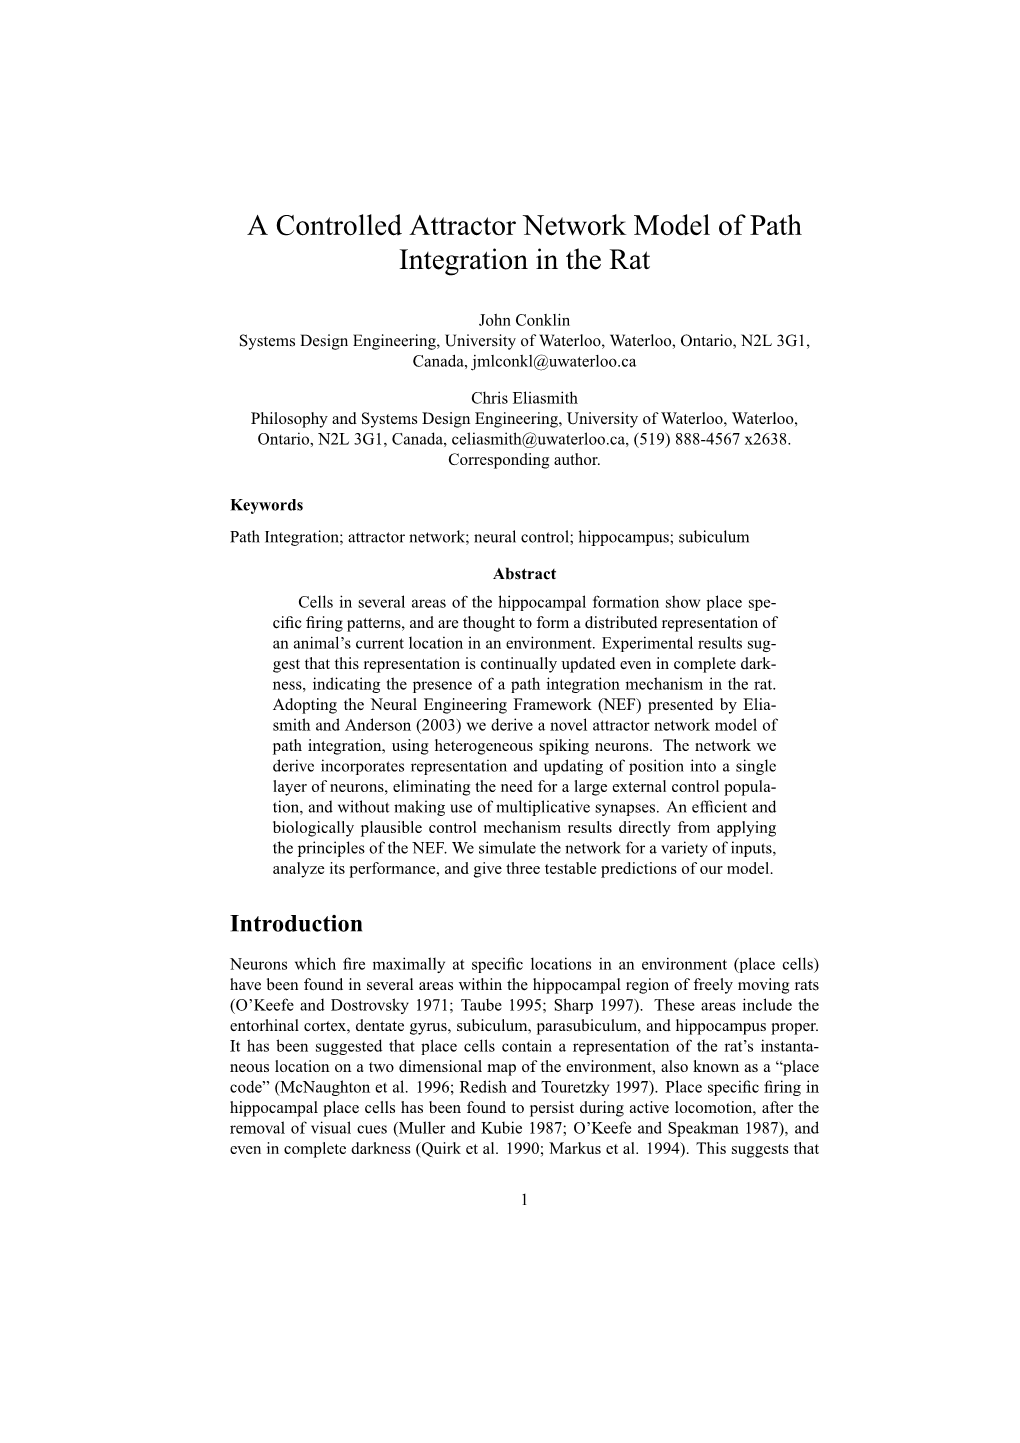 A Controlled Attractor Network Model of Path Integration in the Rat